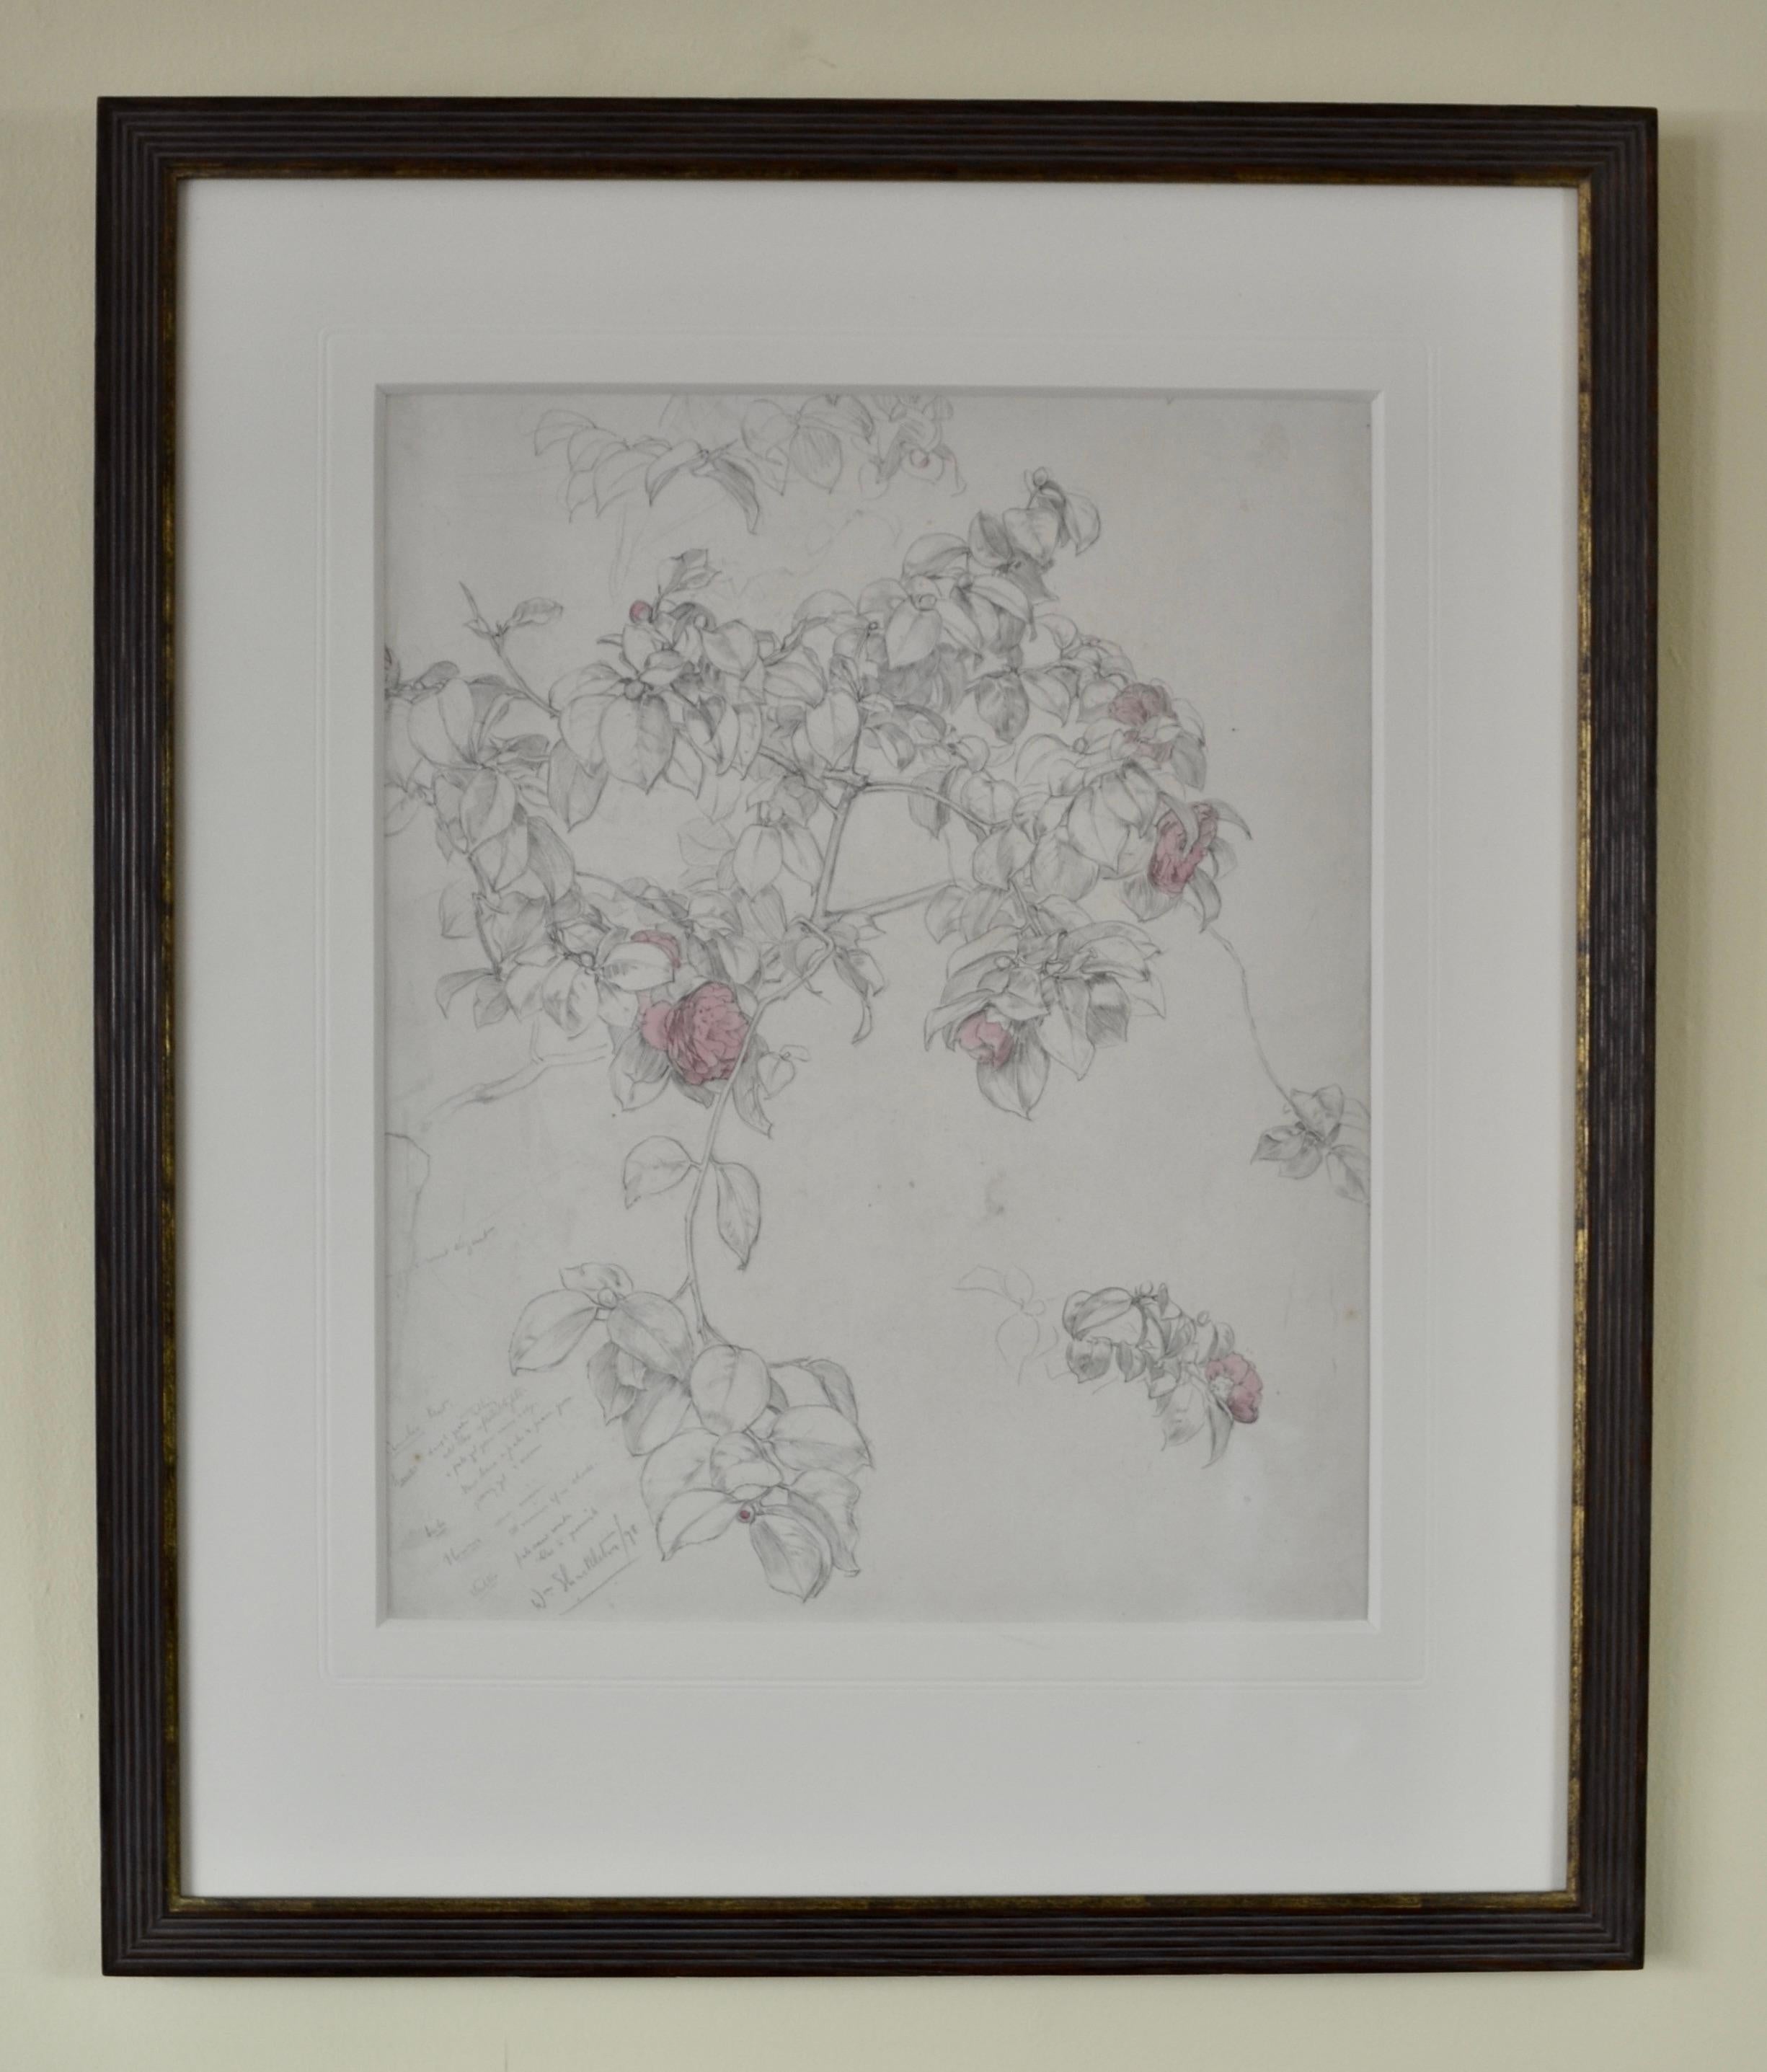 WILLIAM SHACKLETON, NEAC
(1872-1933)

Camellia, Kew

Signed, extensively inscribed and dated ‘98
Pencil and watercolour
Framed

33.5 by 27 cm., 13 ¾ by 10 ½ in.
(frame size 51 by 42.5 cm., 20 by 16 ¾ in.)

Provenance:
The artist’s studio